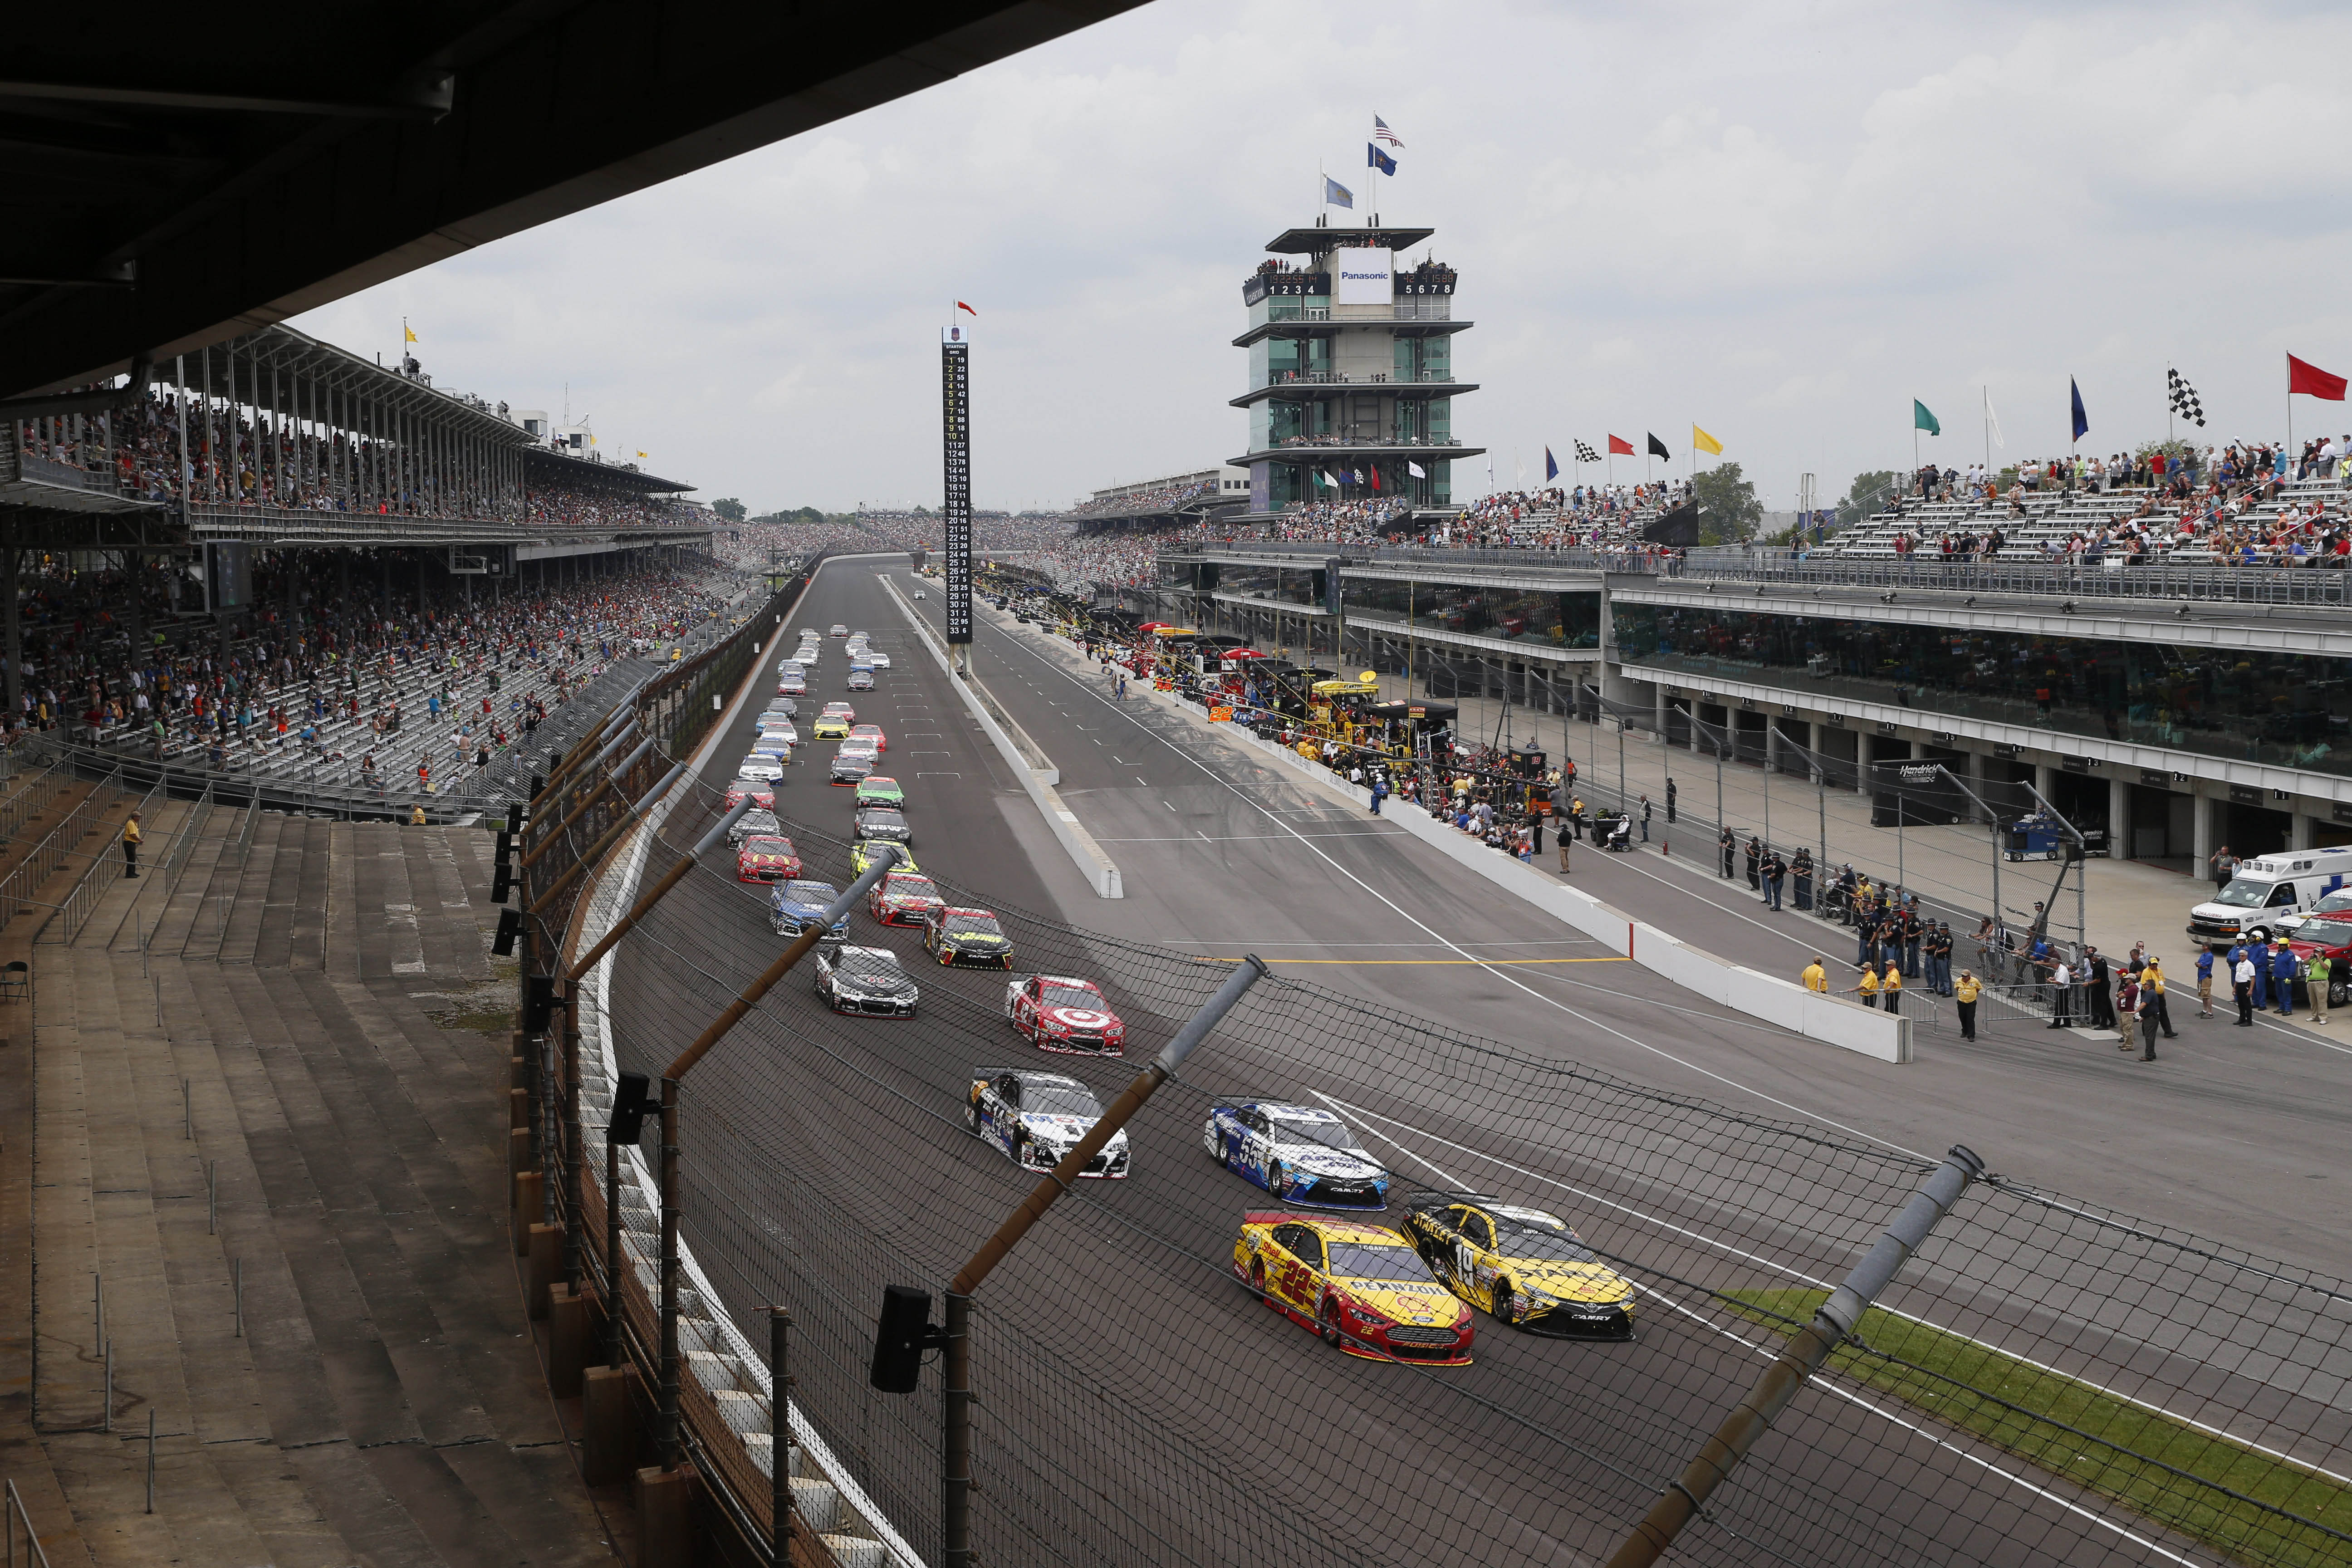 Fast forward Story lines to watch at the Brickyard 400